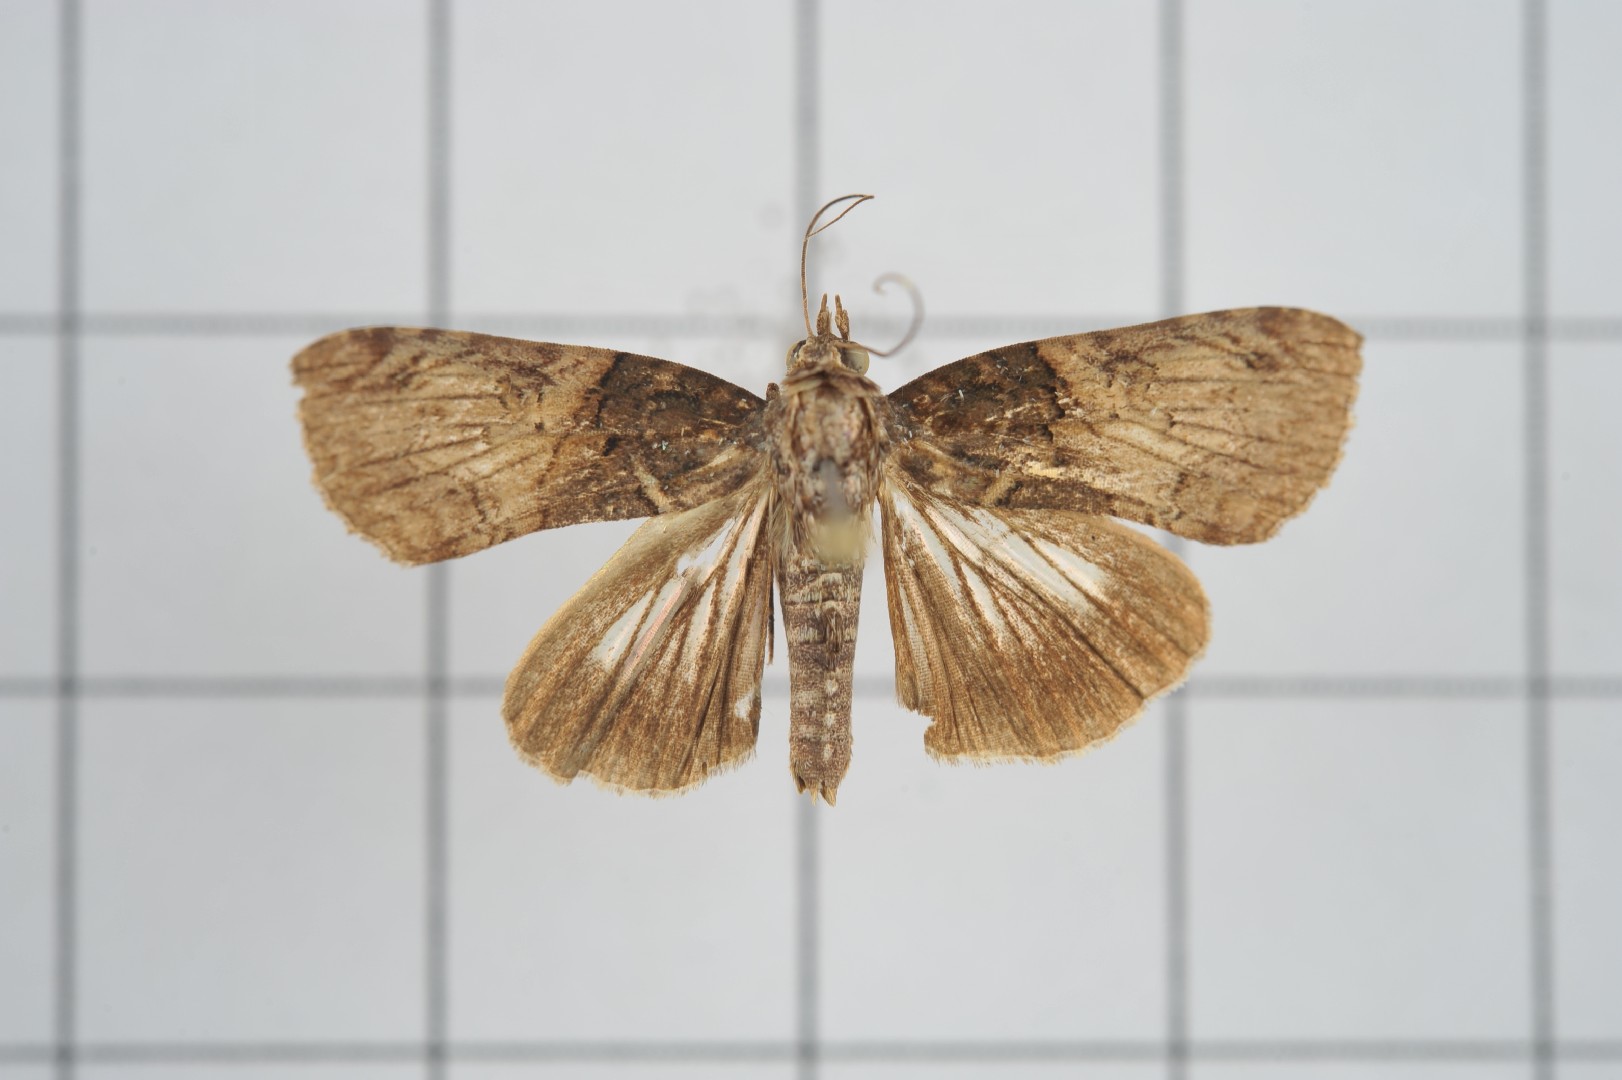 Lophoptera (Lophoptera)